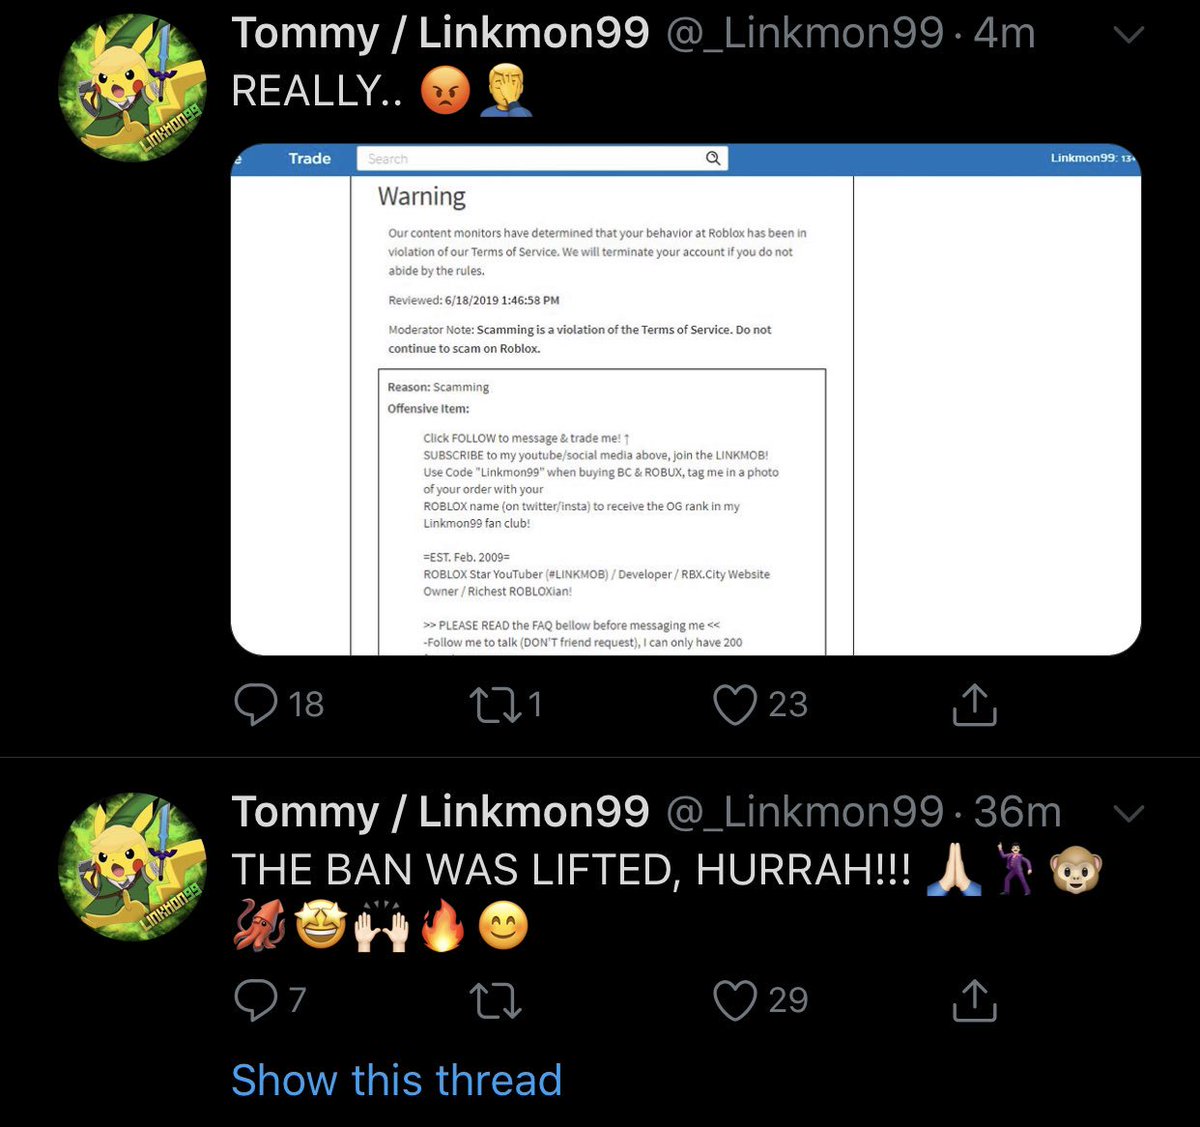 Tommy Use Code Linkmon99 On Twitter Because They Banned Me